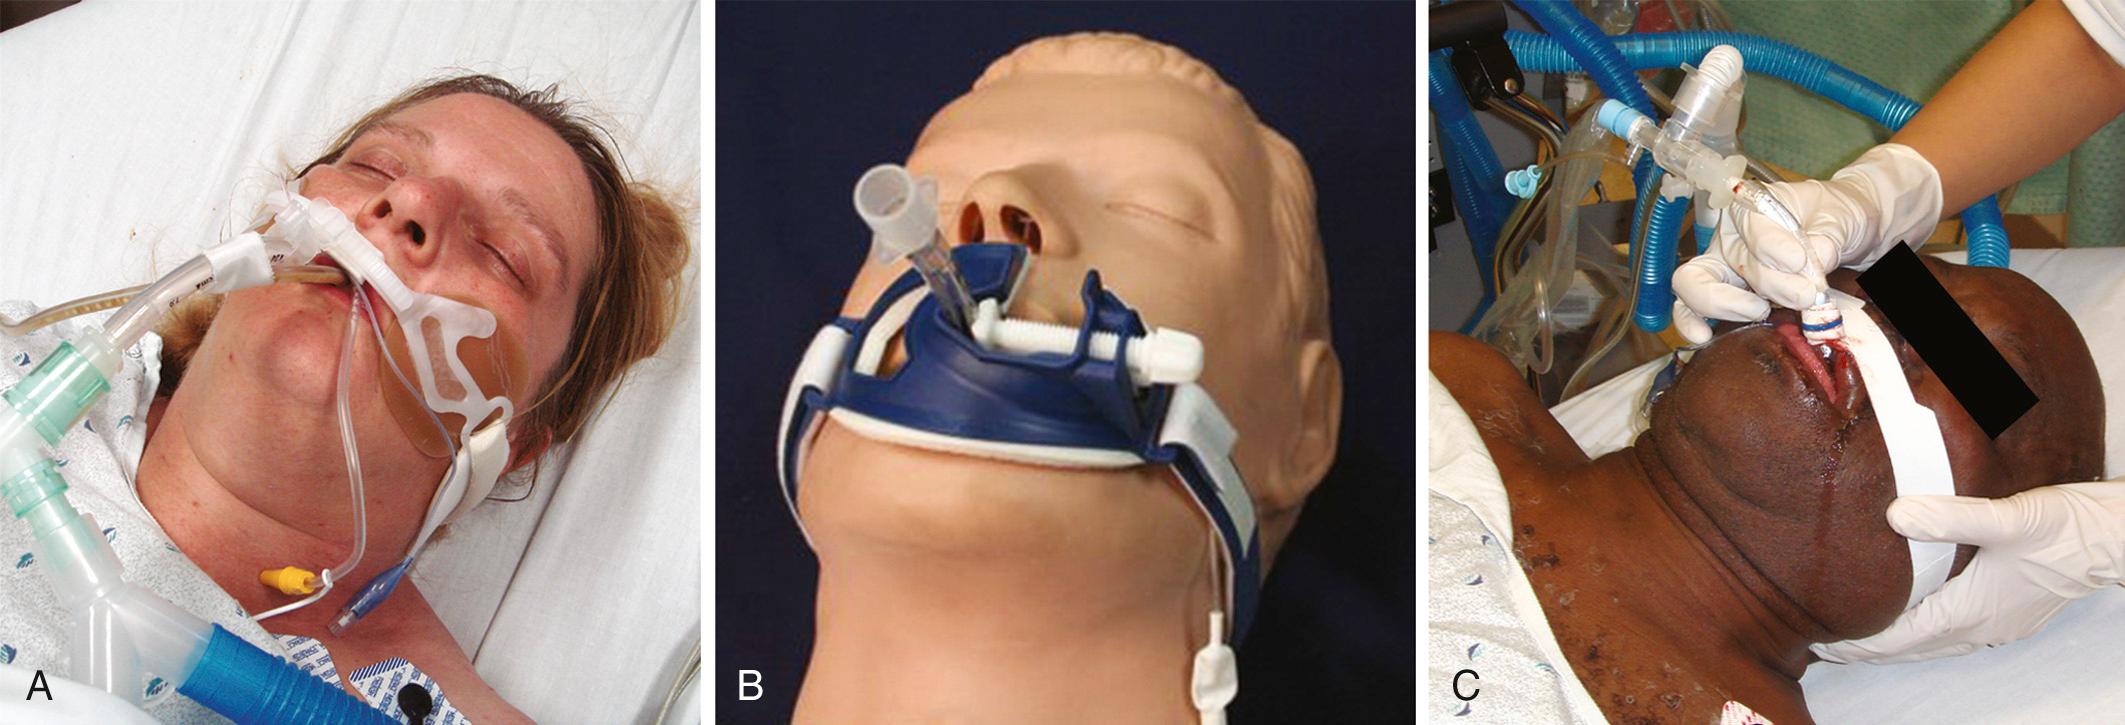 Figure 4.22, A, A commercial disposable tube holder is ideal and preferred to secure an endotracheal (ET) tube without the use of messy tape. B, A plastic disposable ET holder firmly secures the ET tube with a small clamp. C, When positioning a patient for transfer to another bed or for a chest radiograph, ensure the integrity of the ET tube by placing the right hand firmly against the right side of the face while holding the tube securely with the same hand. The other hand immobilizes the neck.